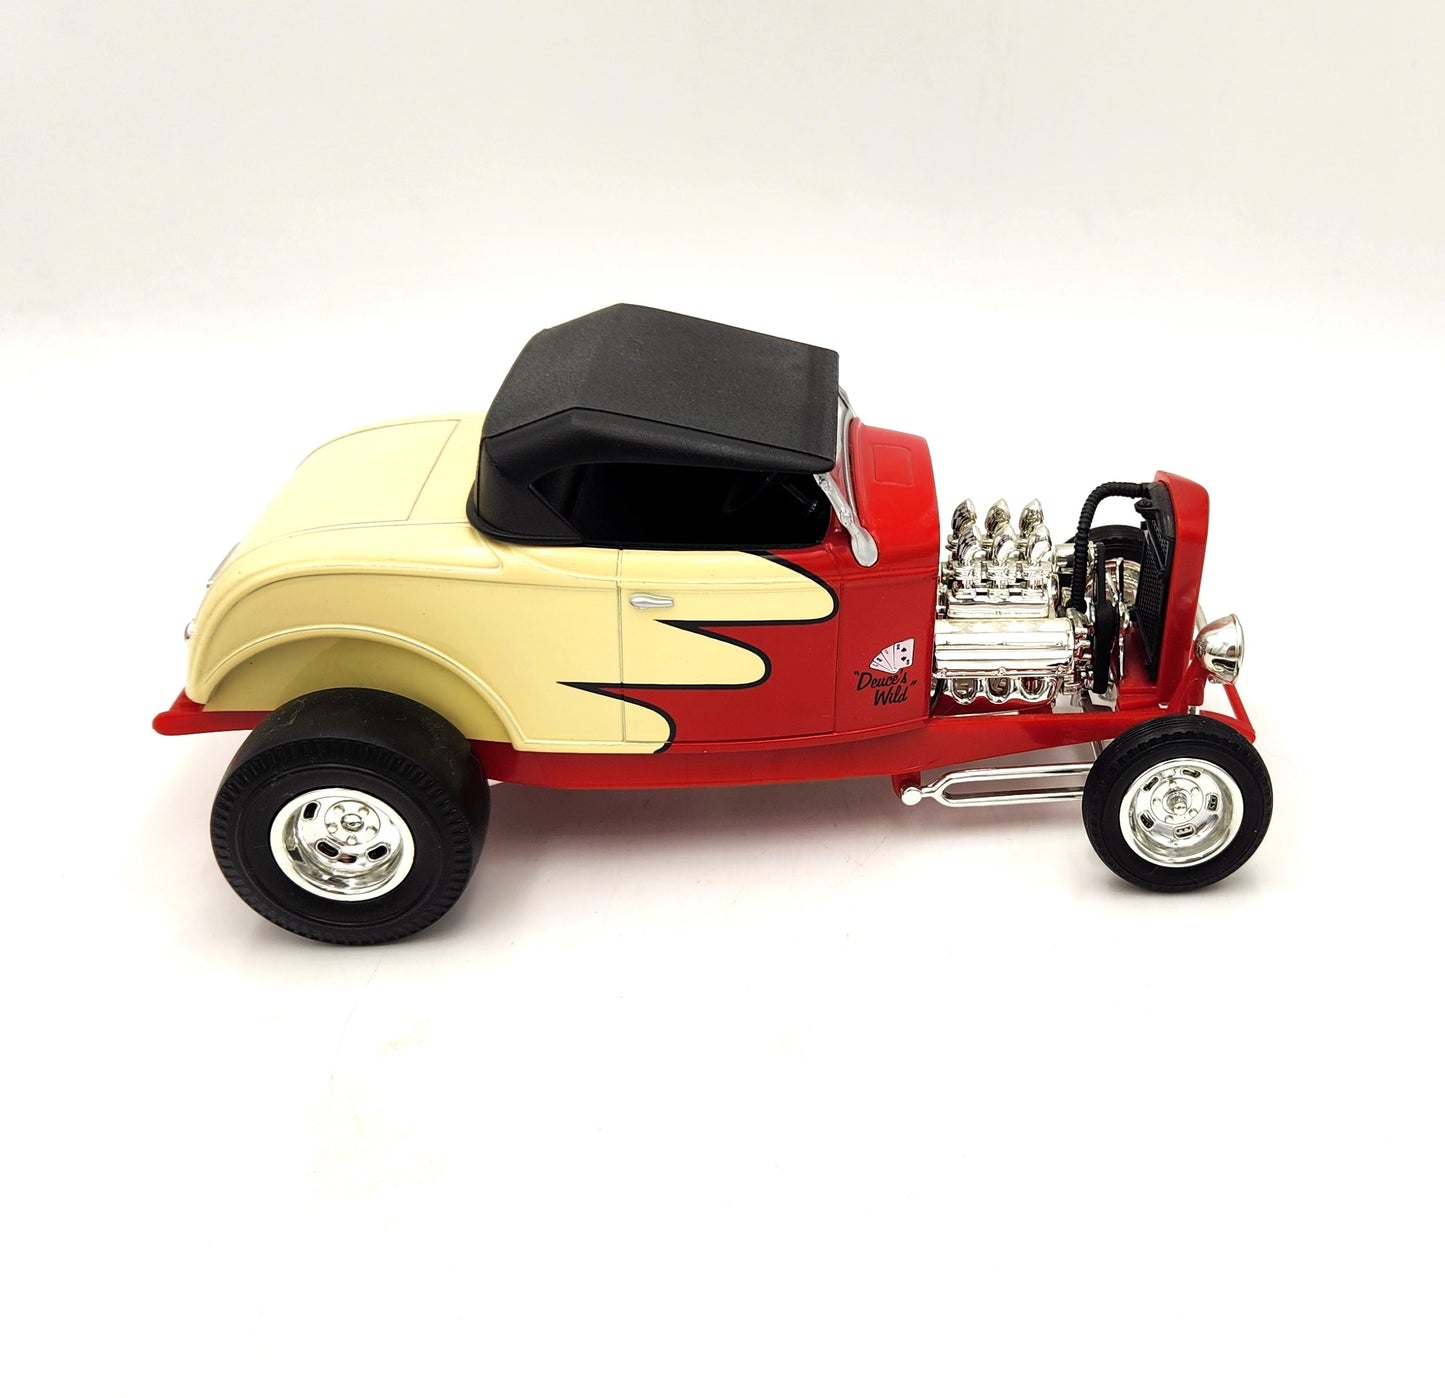 Hot Wheels - '32 Ford 'Deuce's Wild' Coupe - 1:18 Scale